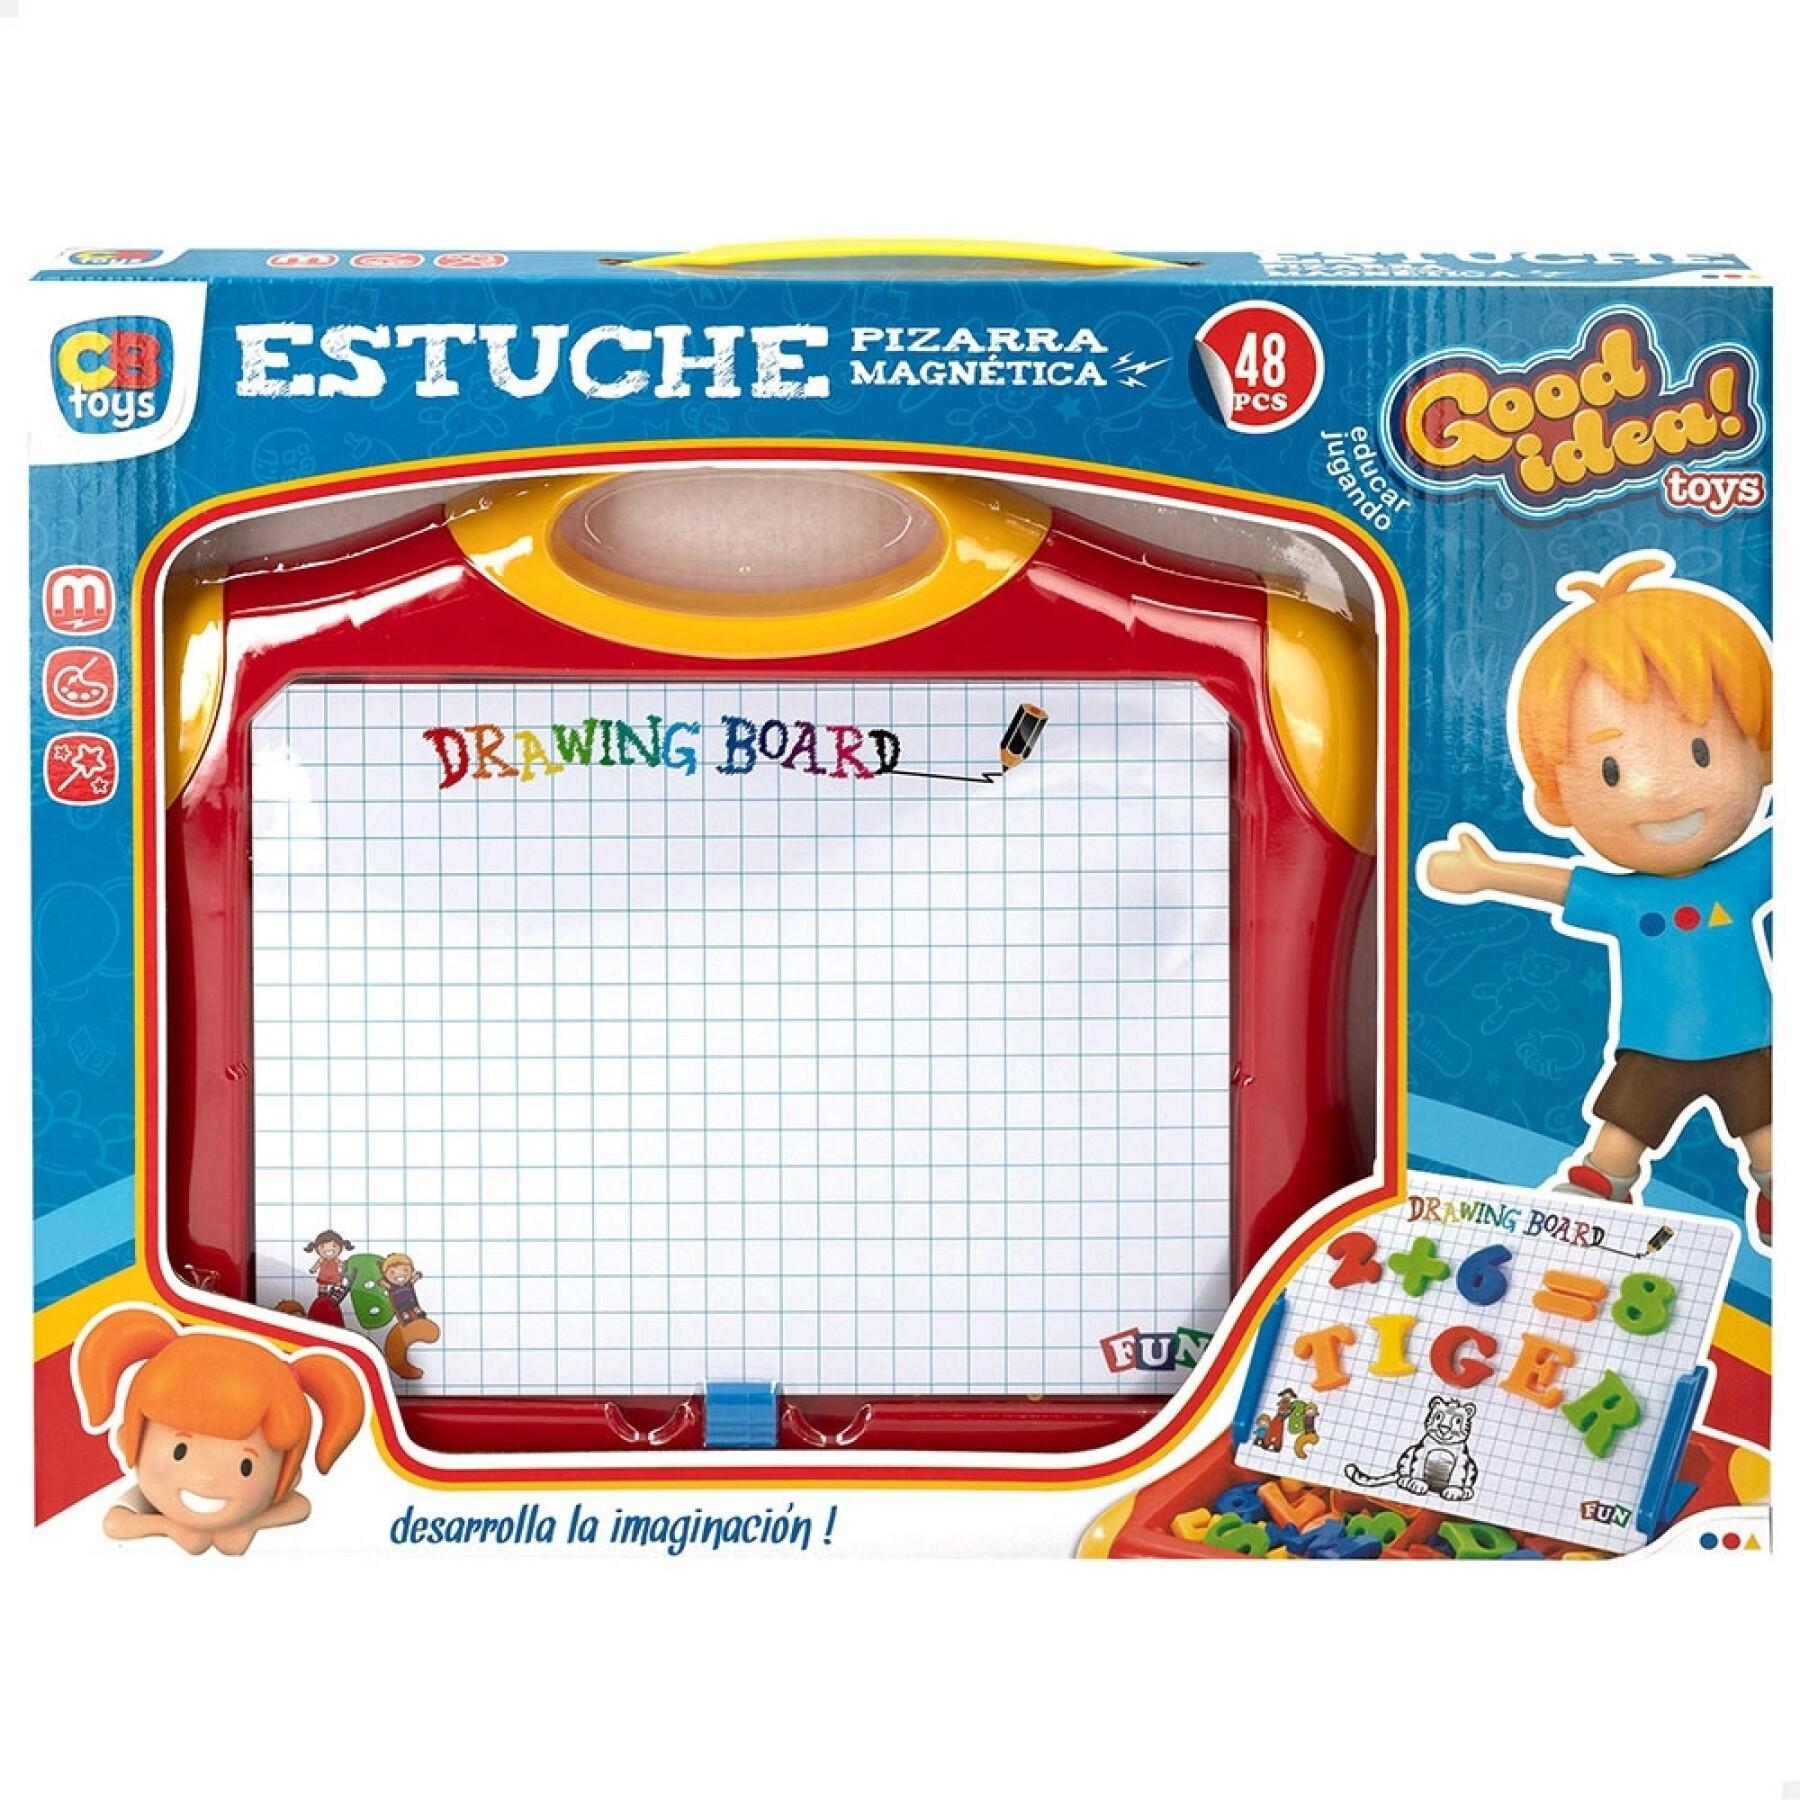 Magnetic board with blocks CB Toys